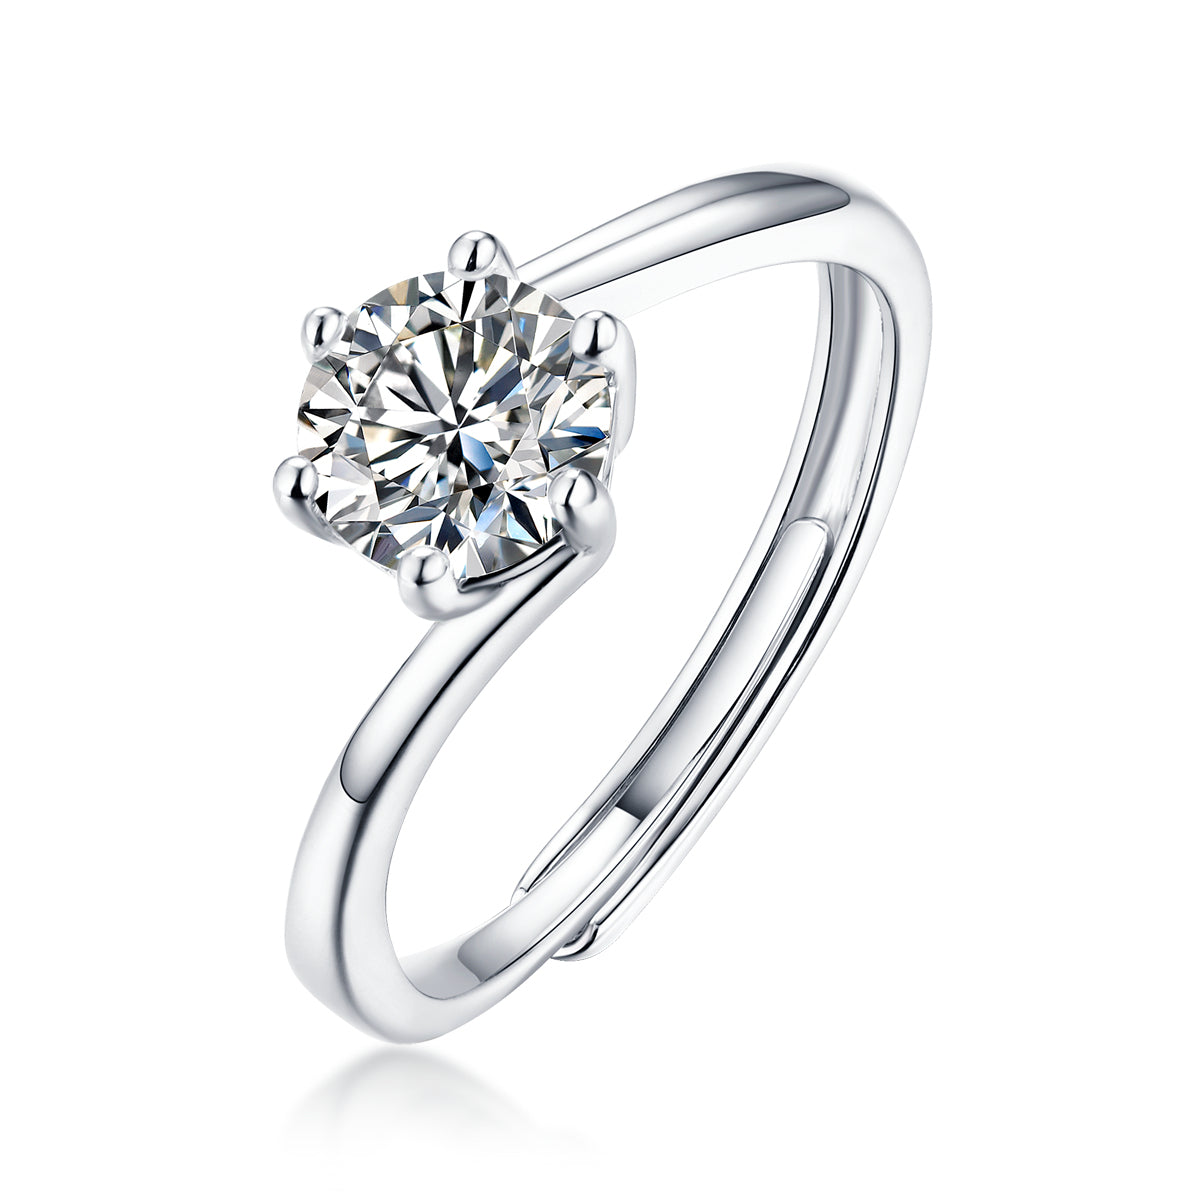 IE05332 ROUND CUT MOISSANITE ENGANGEMENT RING IN STERLING SILVER